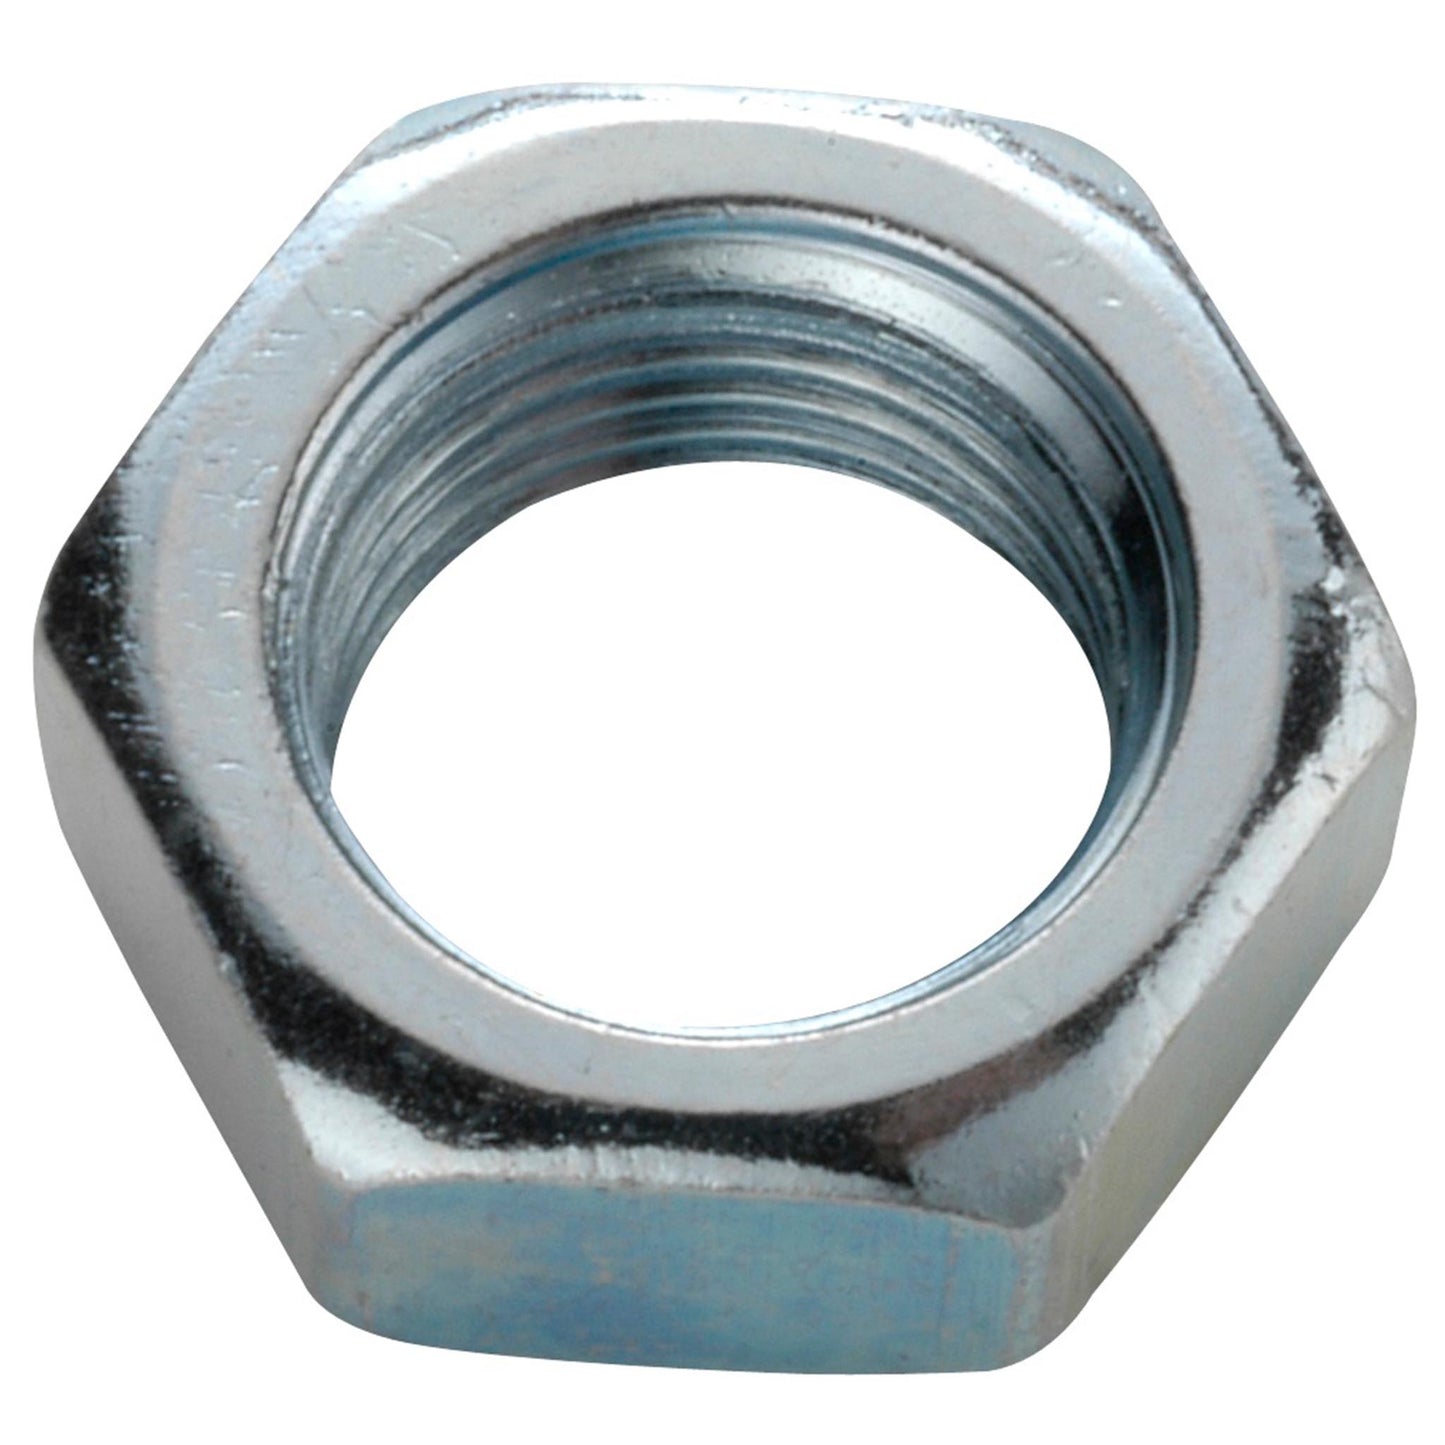 Hexagonal nuts for circuits FG 10.5, galvanized steel